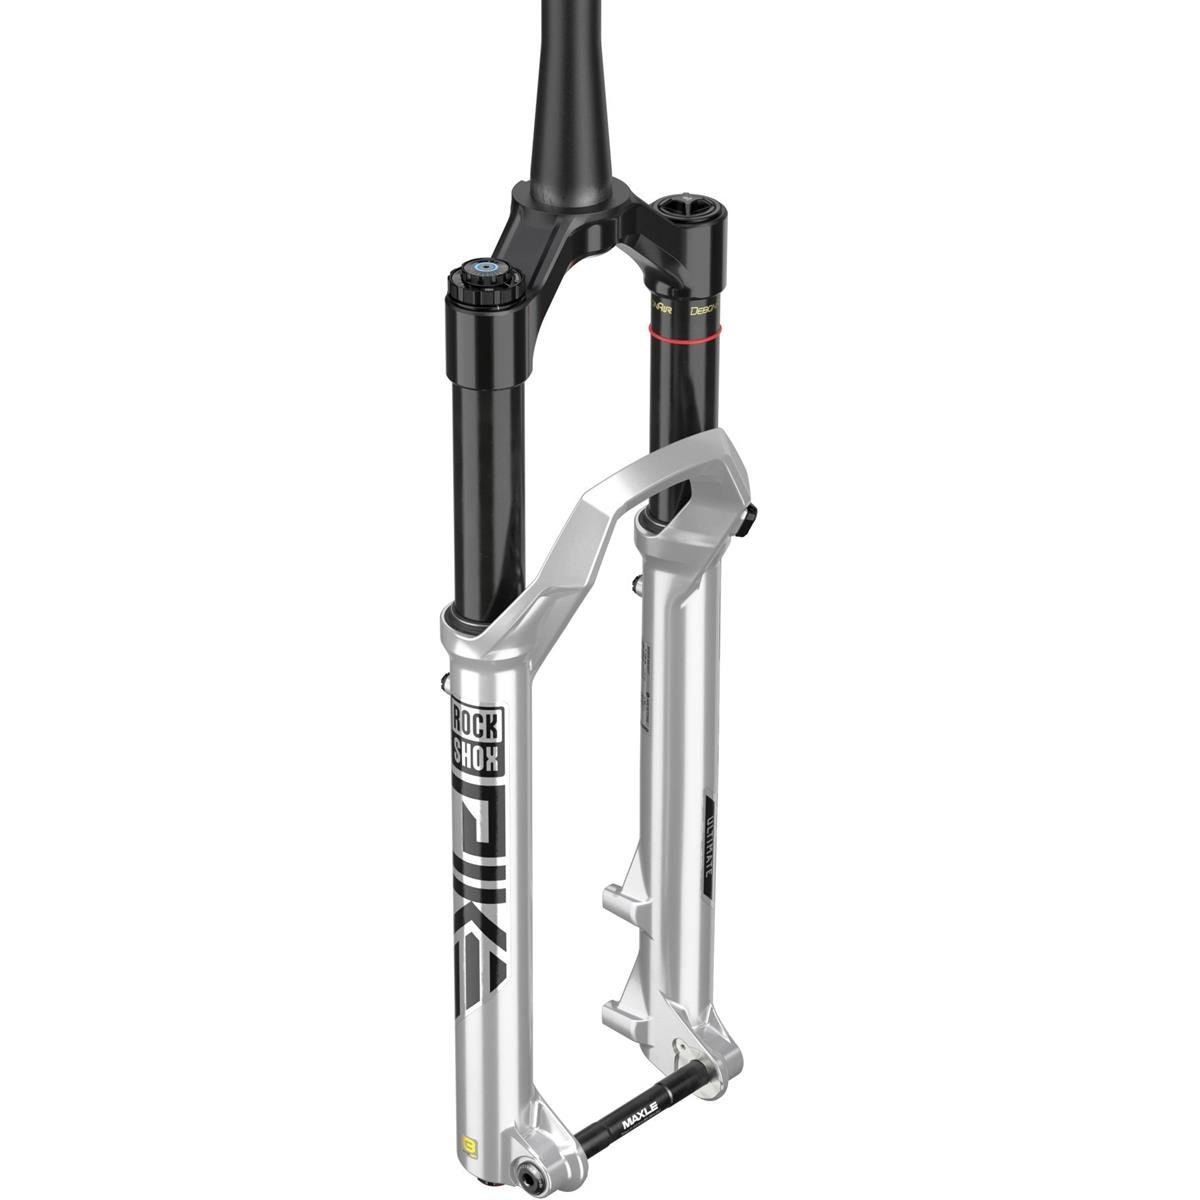 RockShox Forcella Pike Ultimate Charger 3 RC2 29 Pollici, 15x110 mm, Argento, 44 mm Offset, 140 mm